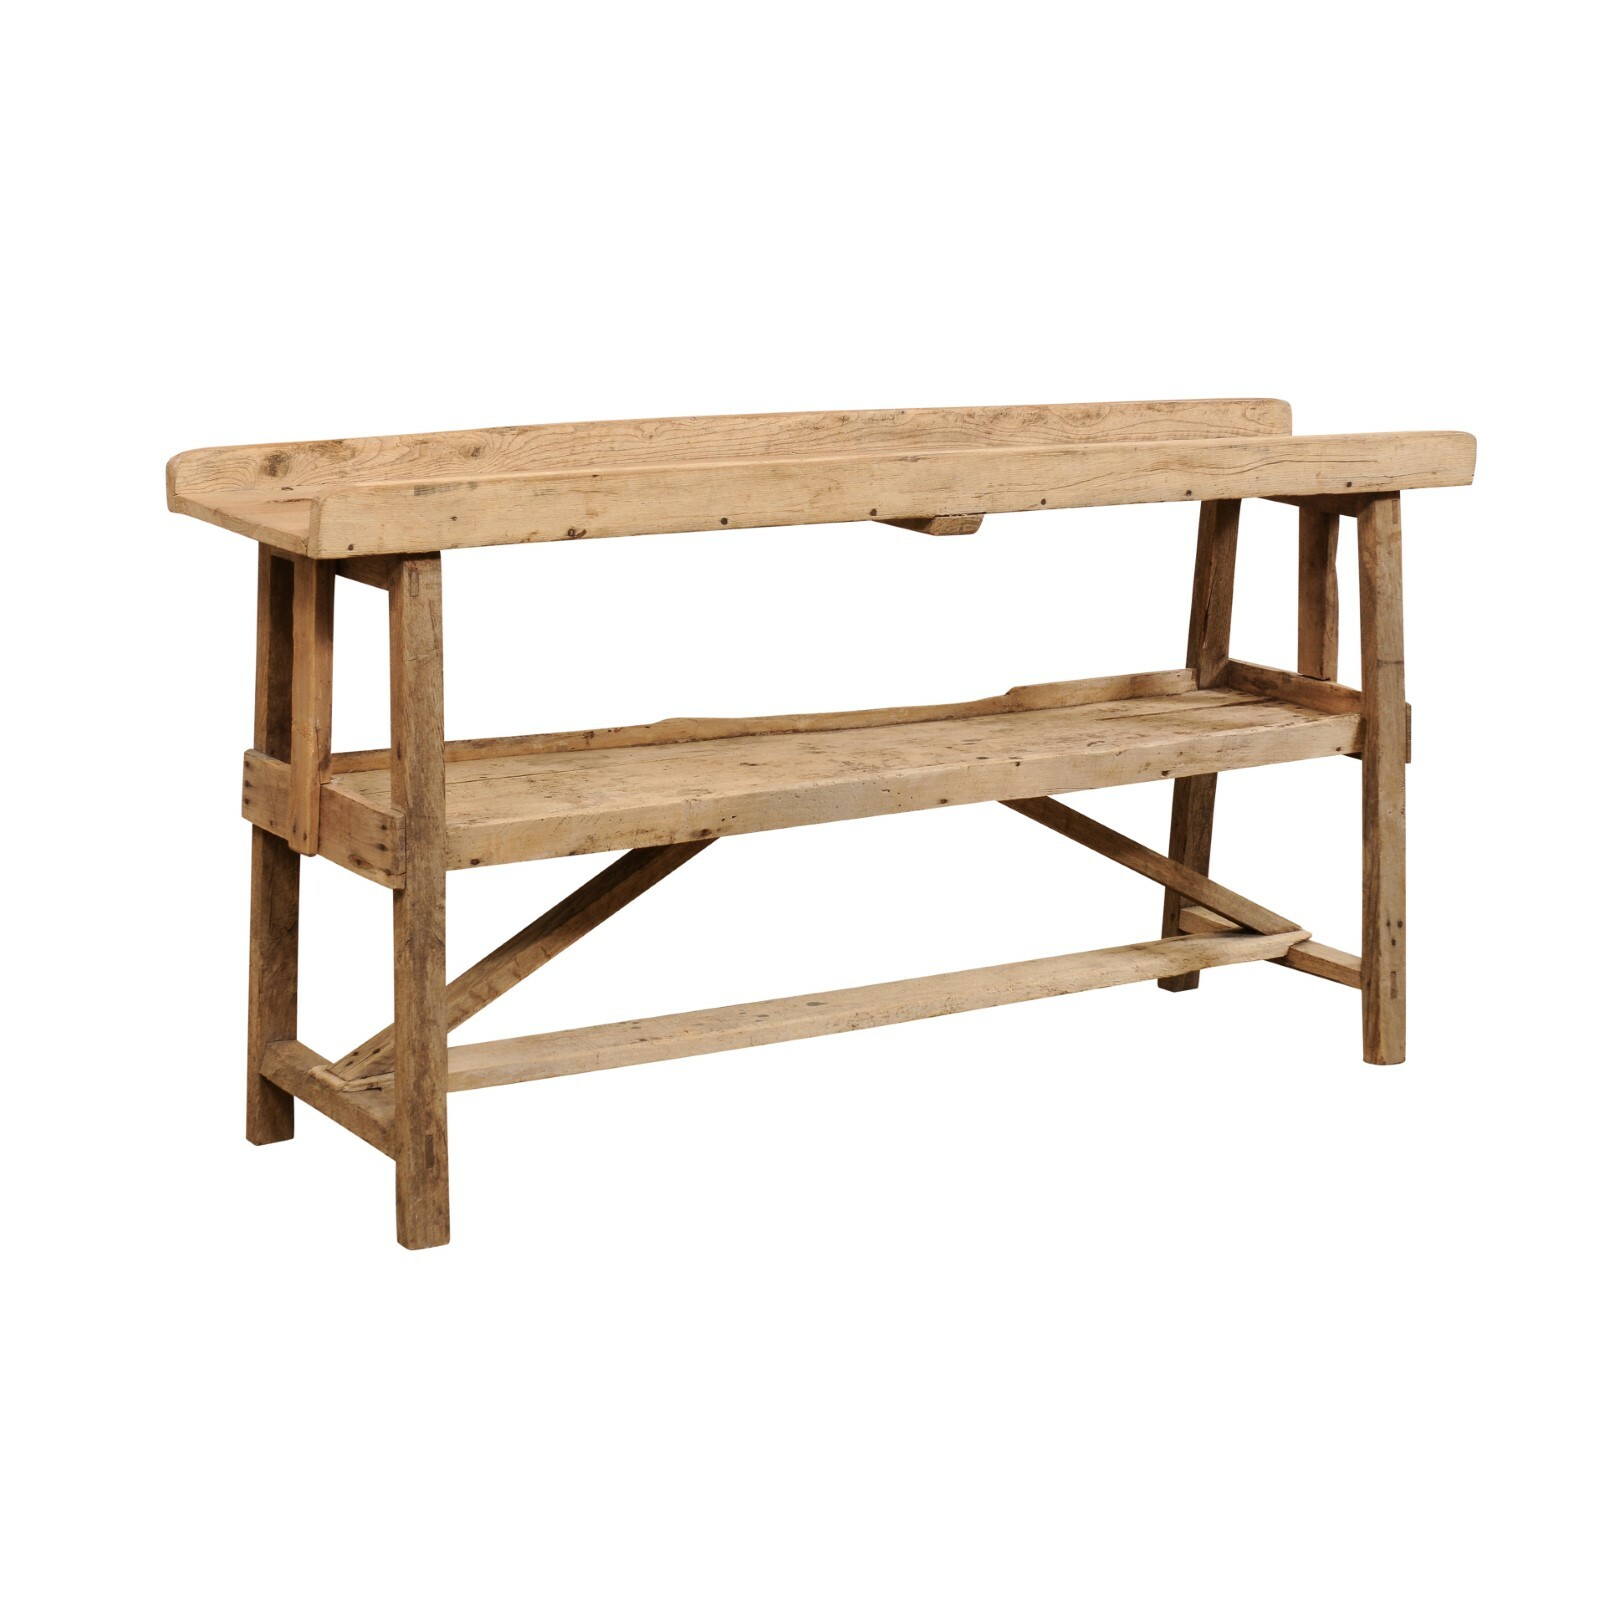 Rustic Spanish Tiered Wooden Antique Table